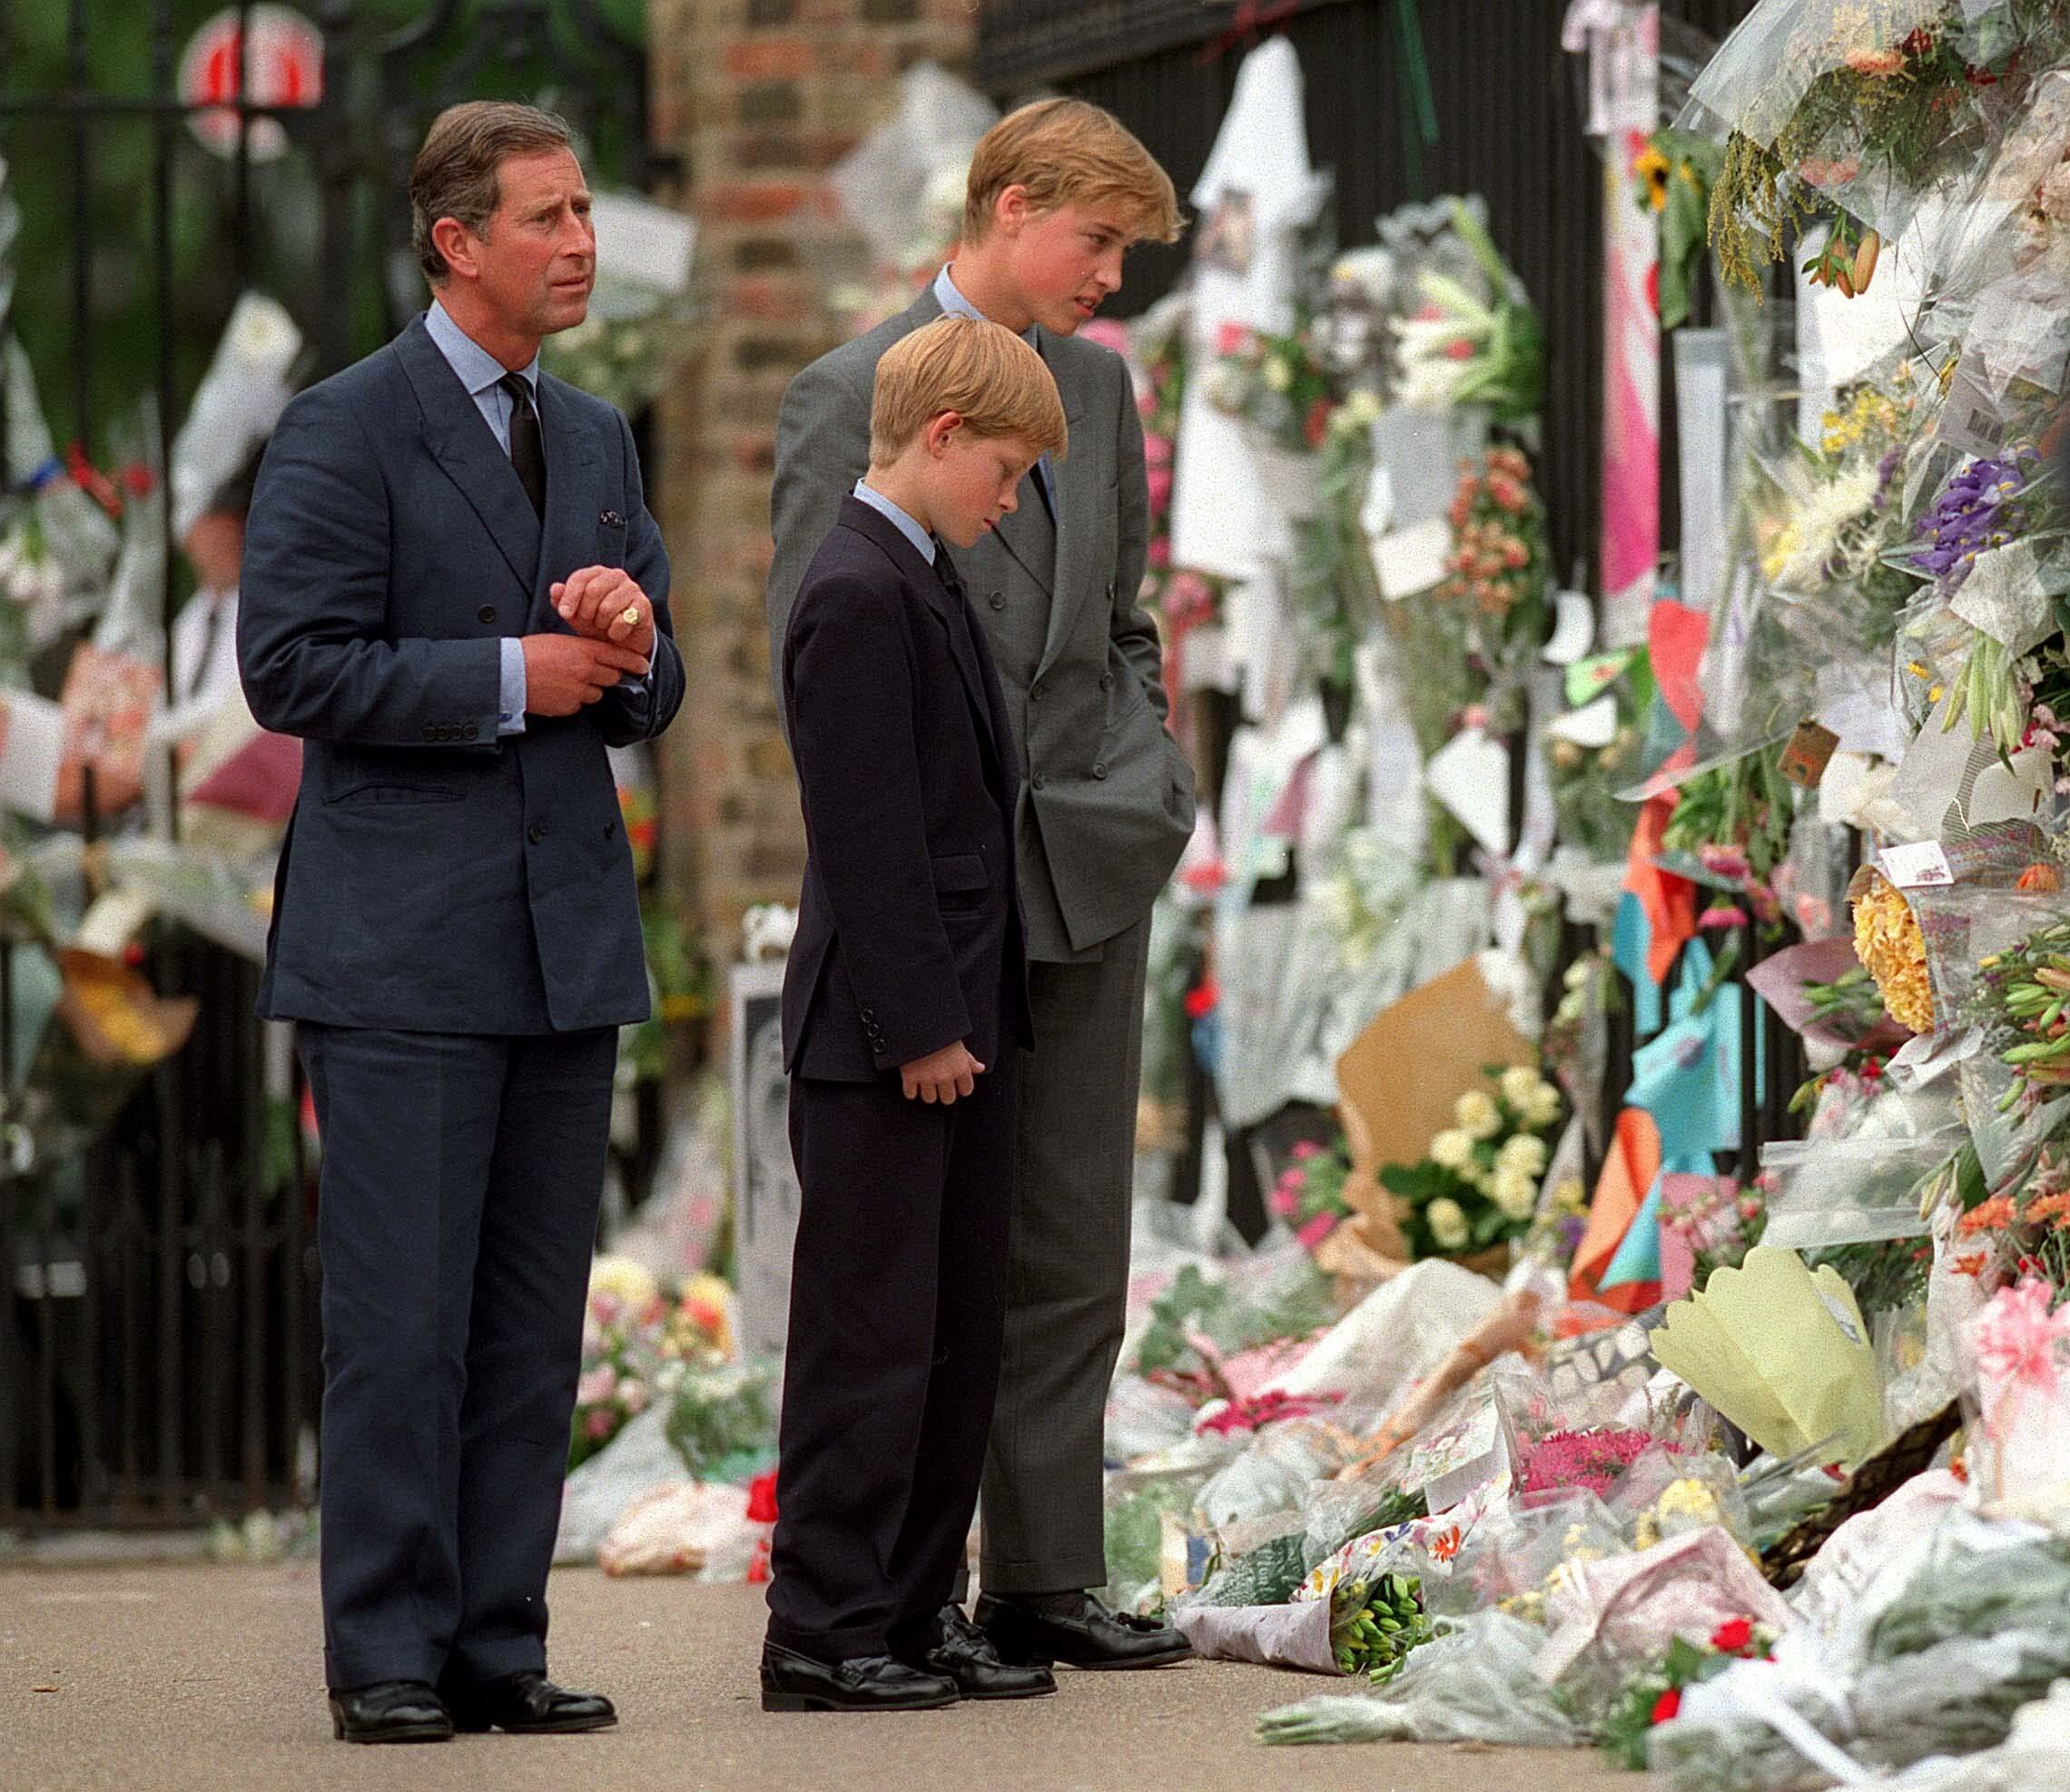 The Prince of Wales, Prince William and Prince Harry look at floral tributes to Diana, Princess of Wales outside Kensington Palace on September 5, 1997 in London, England. | Source: Getty Images